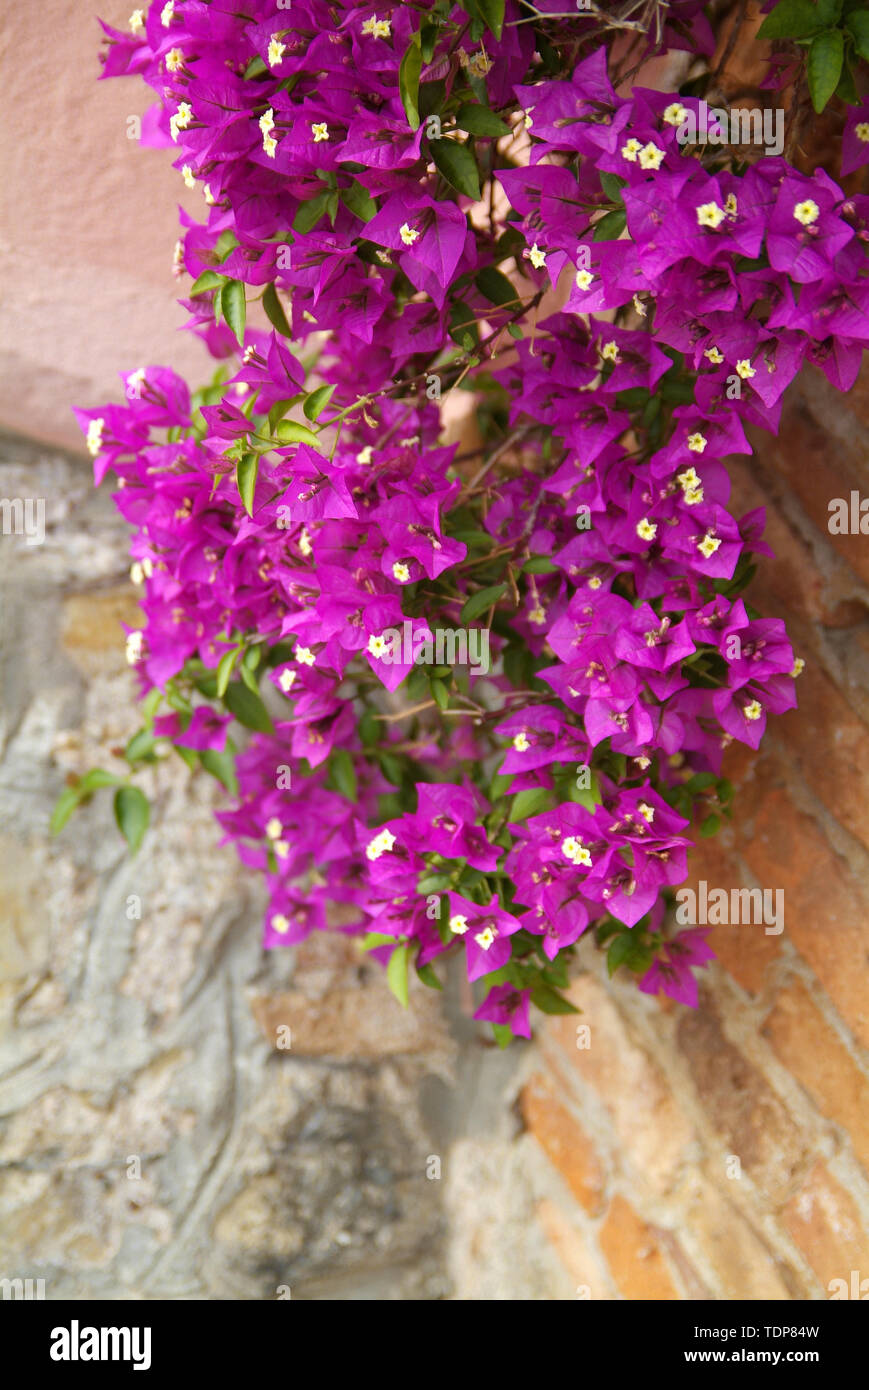 petunia plant in bloomong Stock Photo